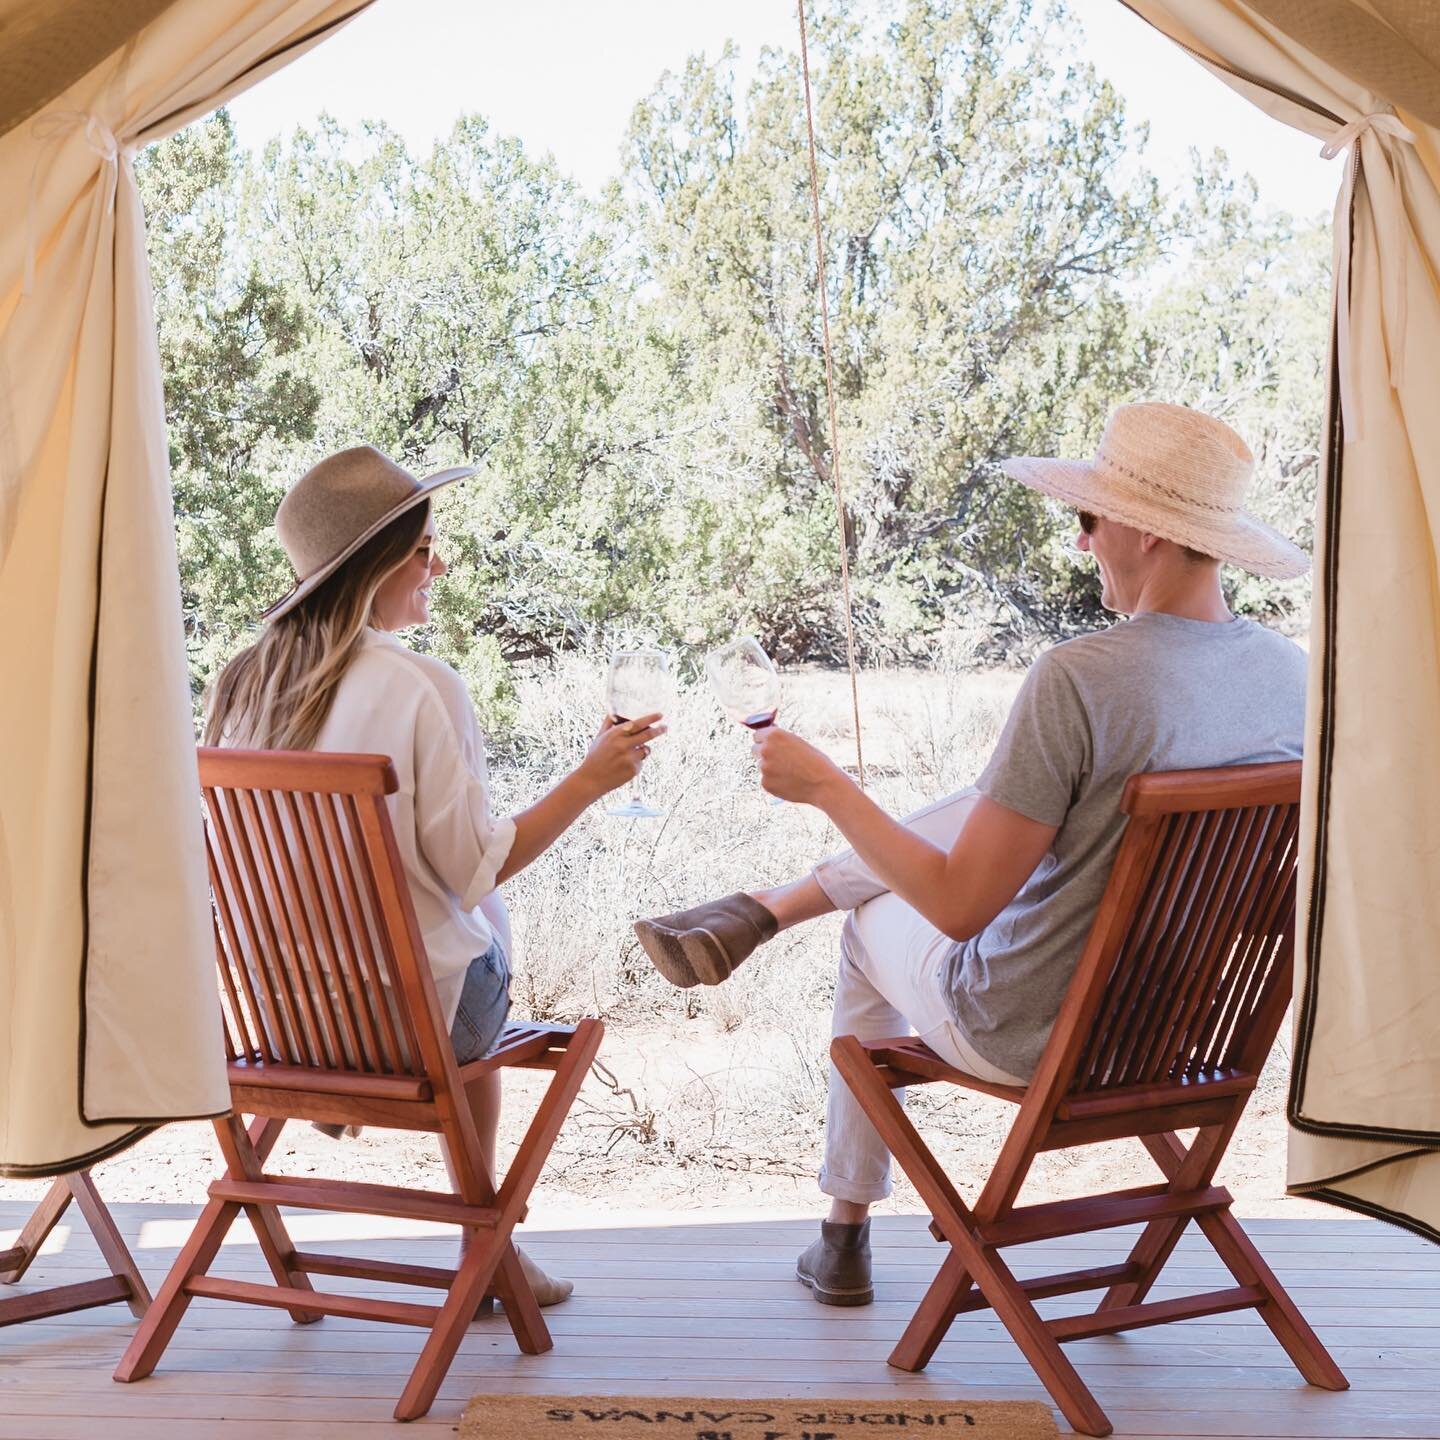 @undercanvasofficial Grand Canyon may be wrapped up for the season, but we are over here already daydreaming about next year&rsquo;s adventures ✨⛺️🌵 If you are looking for an amazing #glamping experience with family, friends or a loved one in some o